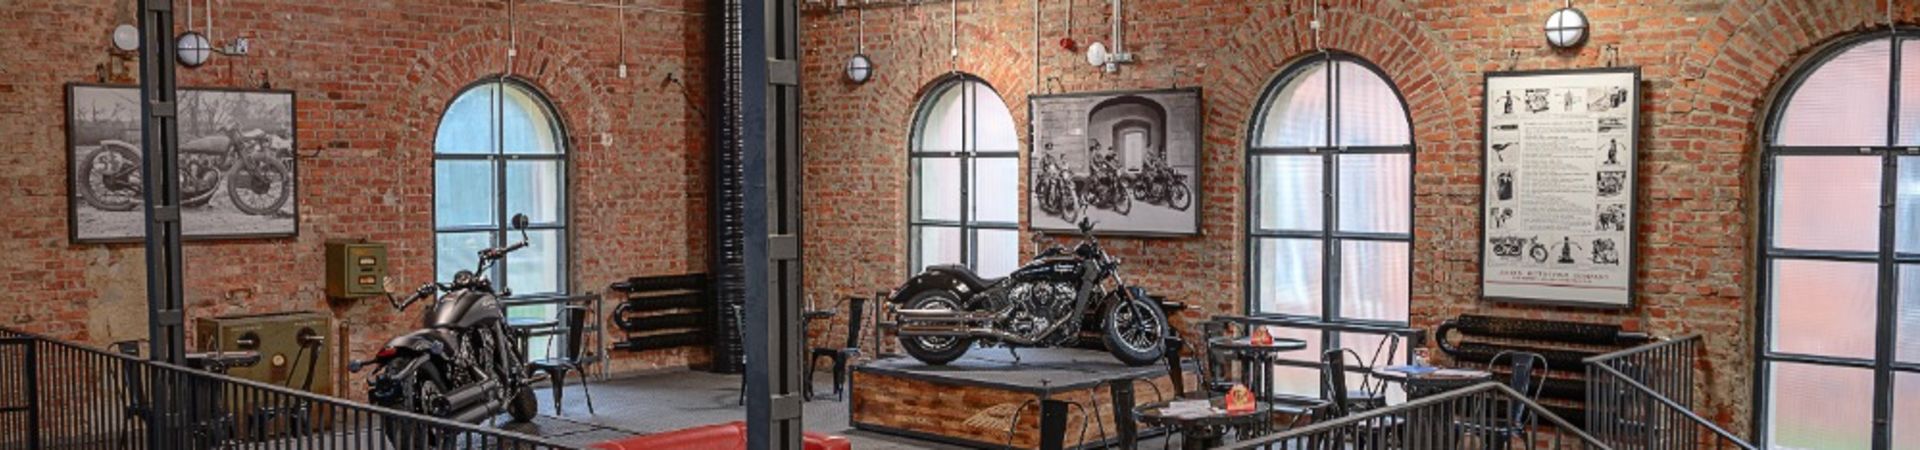 Indian Motorcycle Ostrava, Compress Hall